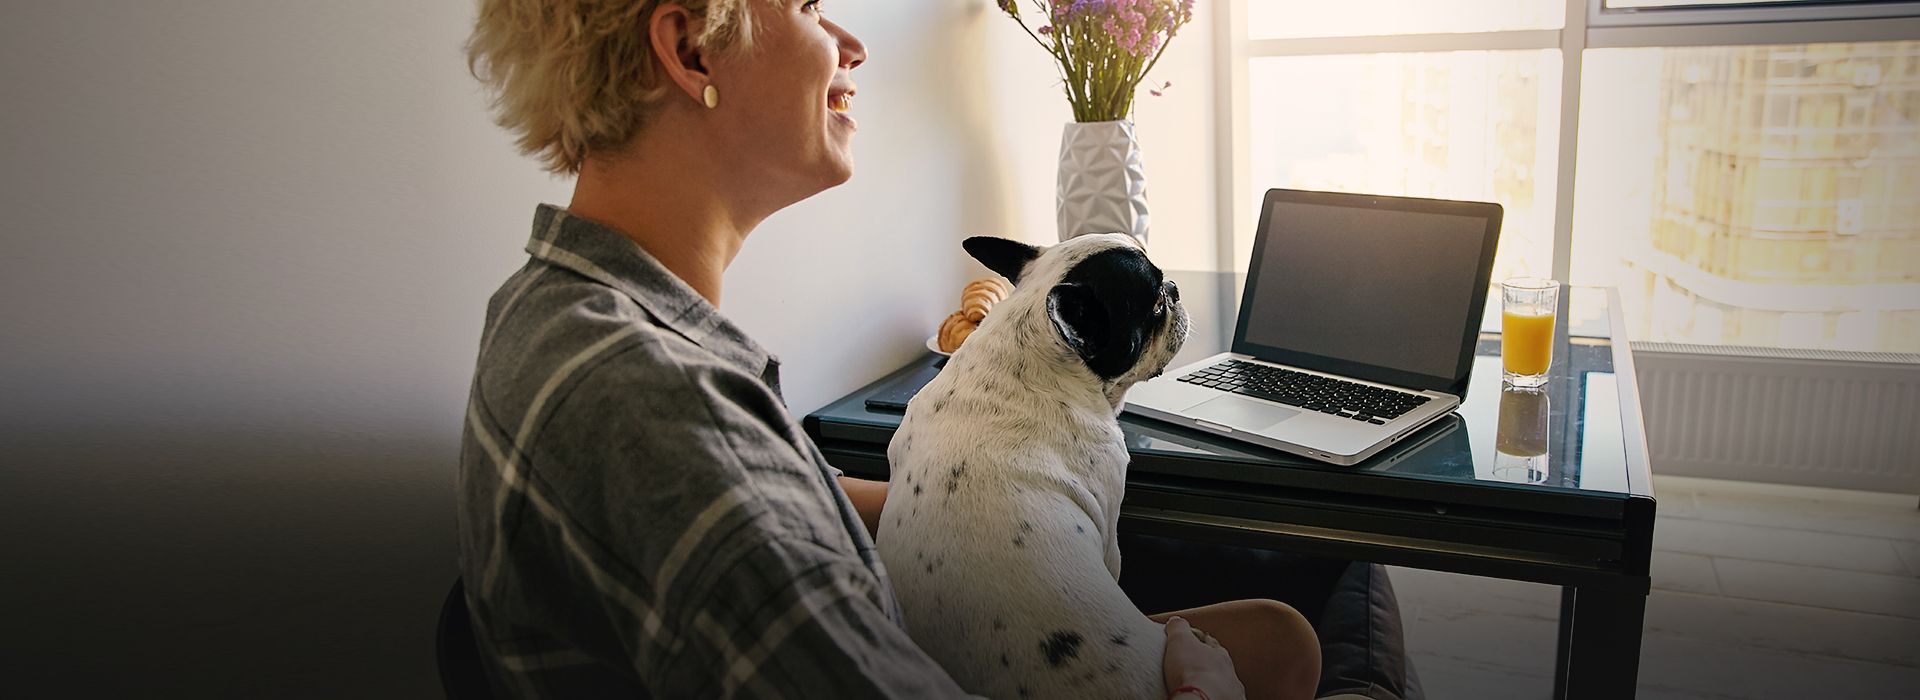 young freelancer female working distantly from home by using portable computer sitting at table next to window and holding her dog being in nice mood